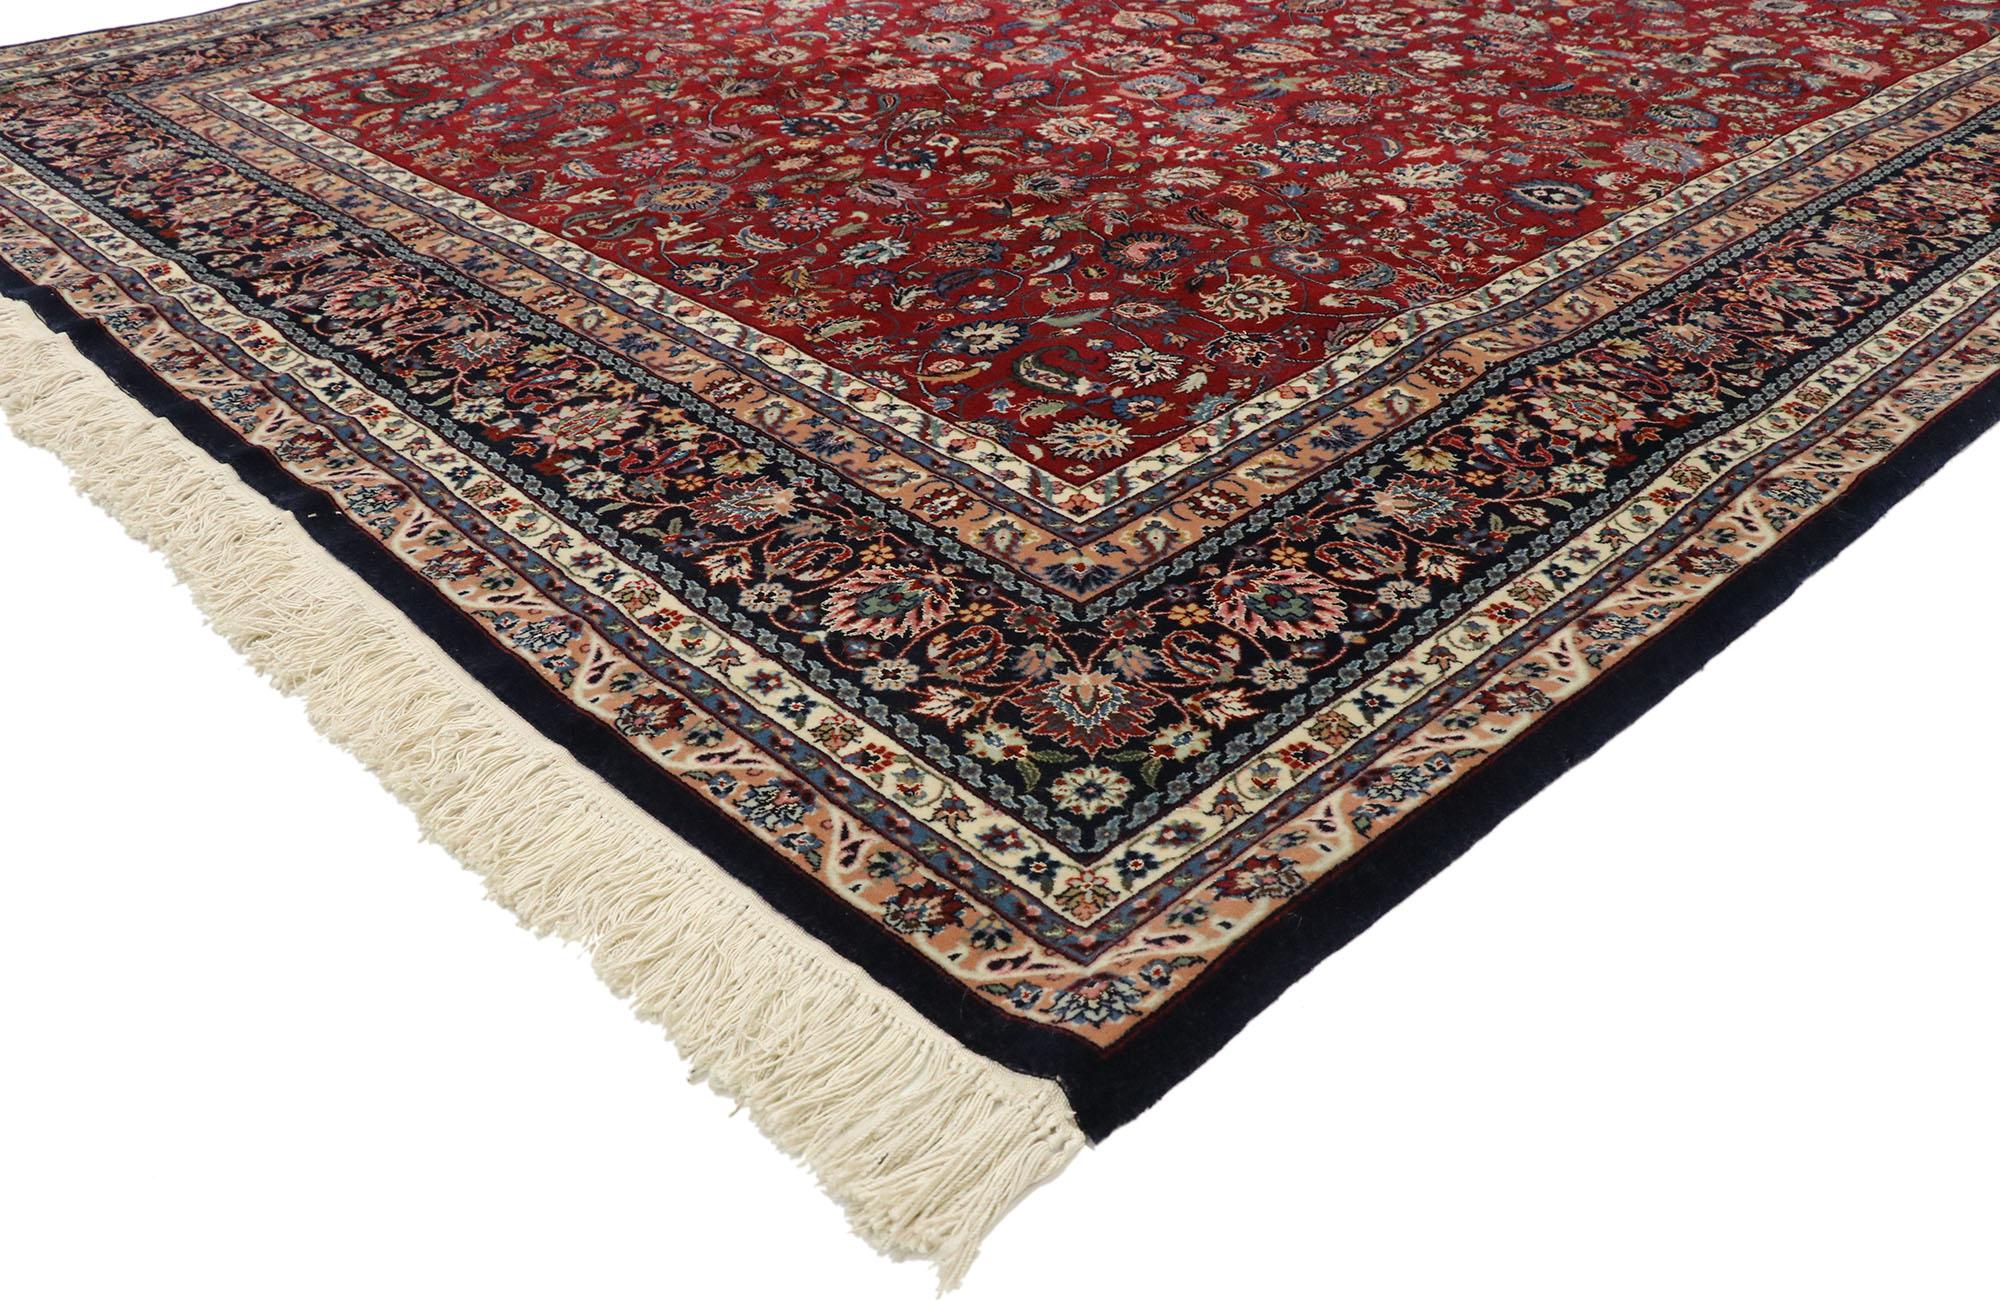 77526 vintage Persian Kashan style wool and silk 300 line rug with Traditional style. Vibrant colors with beguiling ambiance, this hand knotted wool and silk fine Chinese rug beautifully embodies a Persian Kashan design with traditional style. The